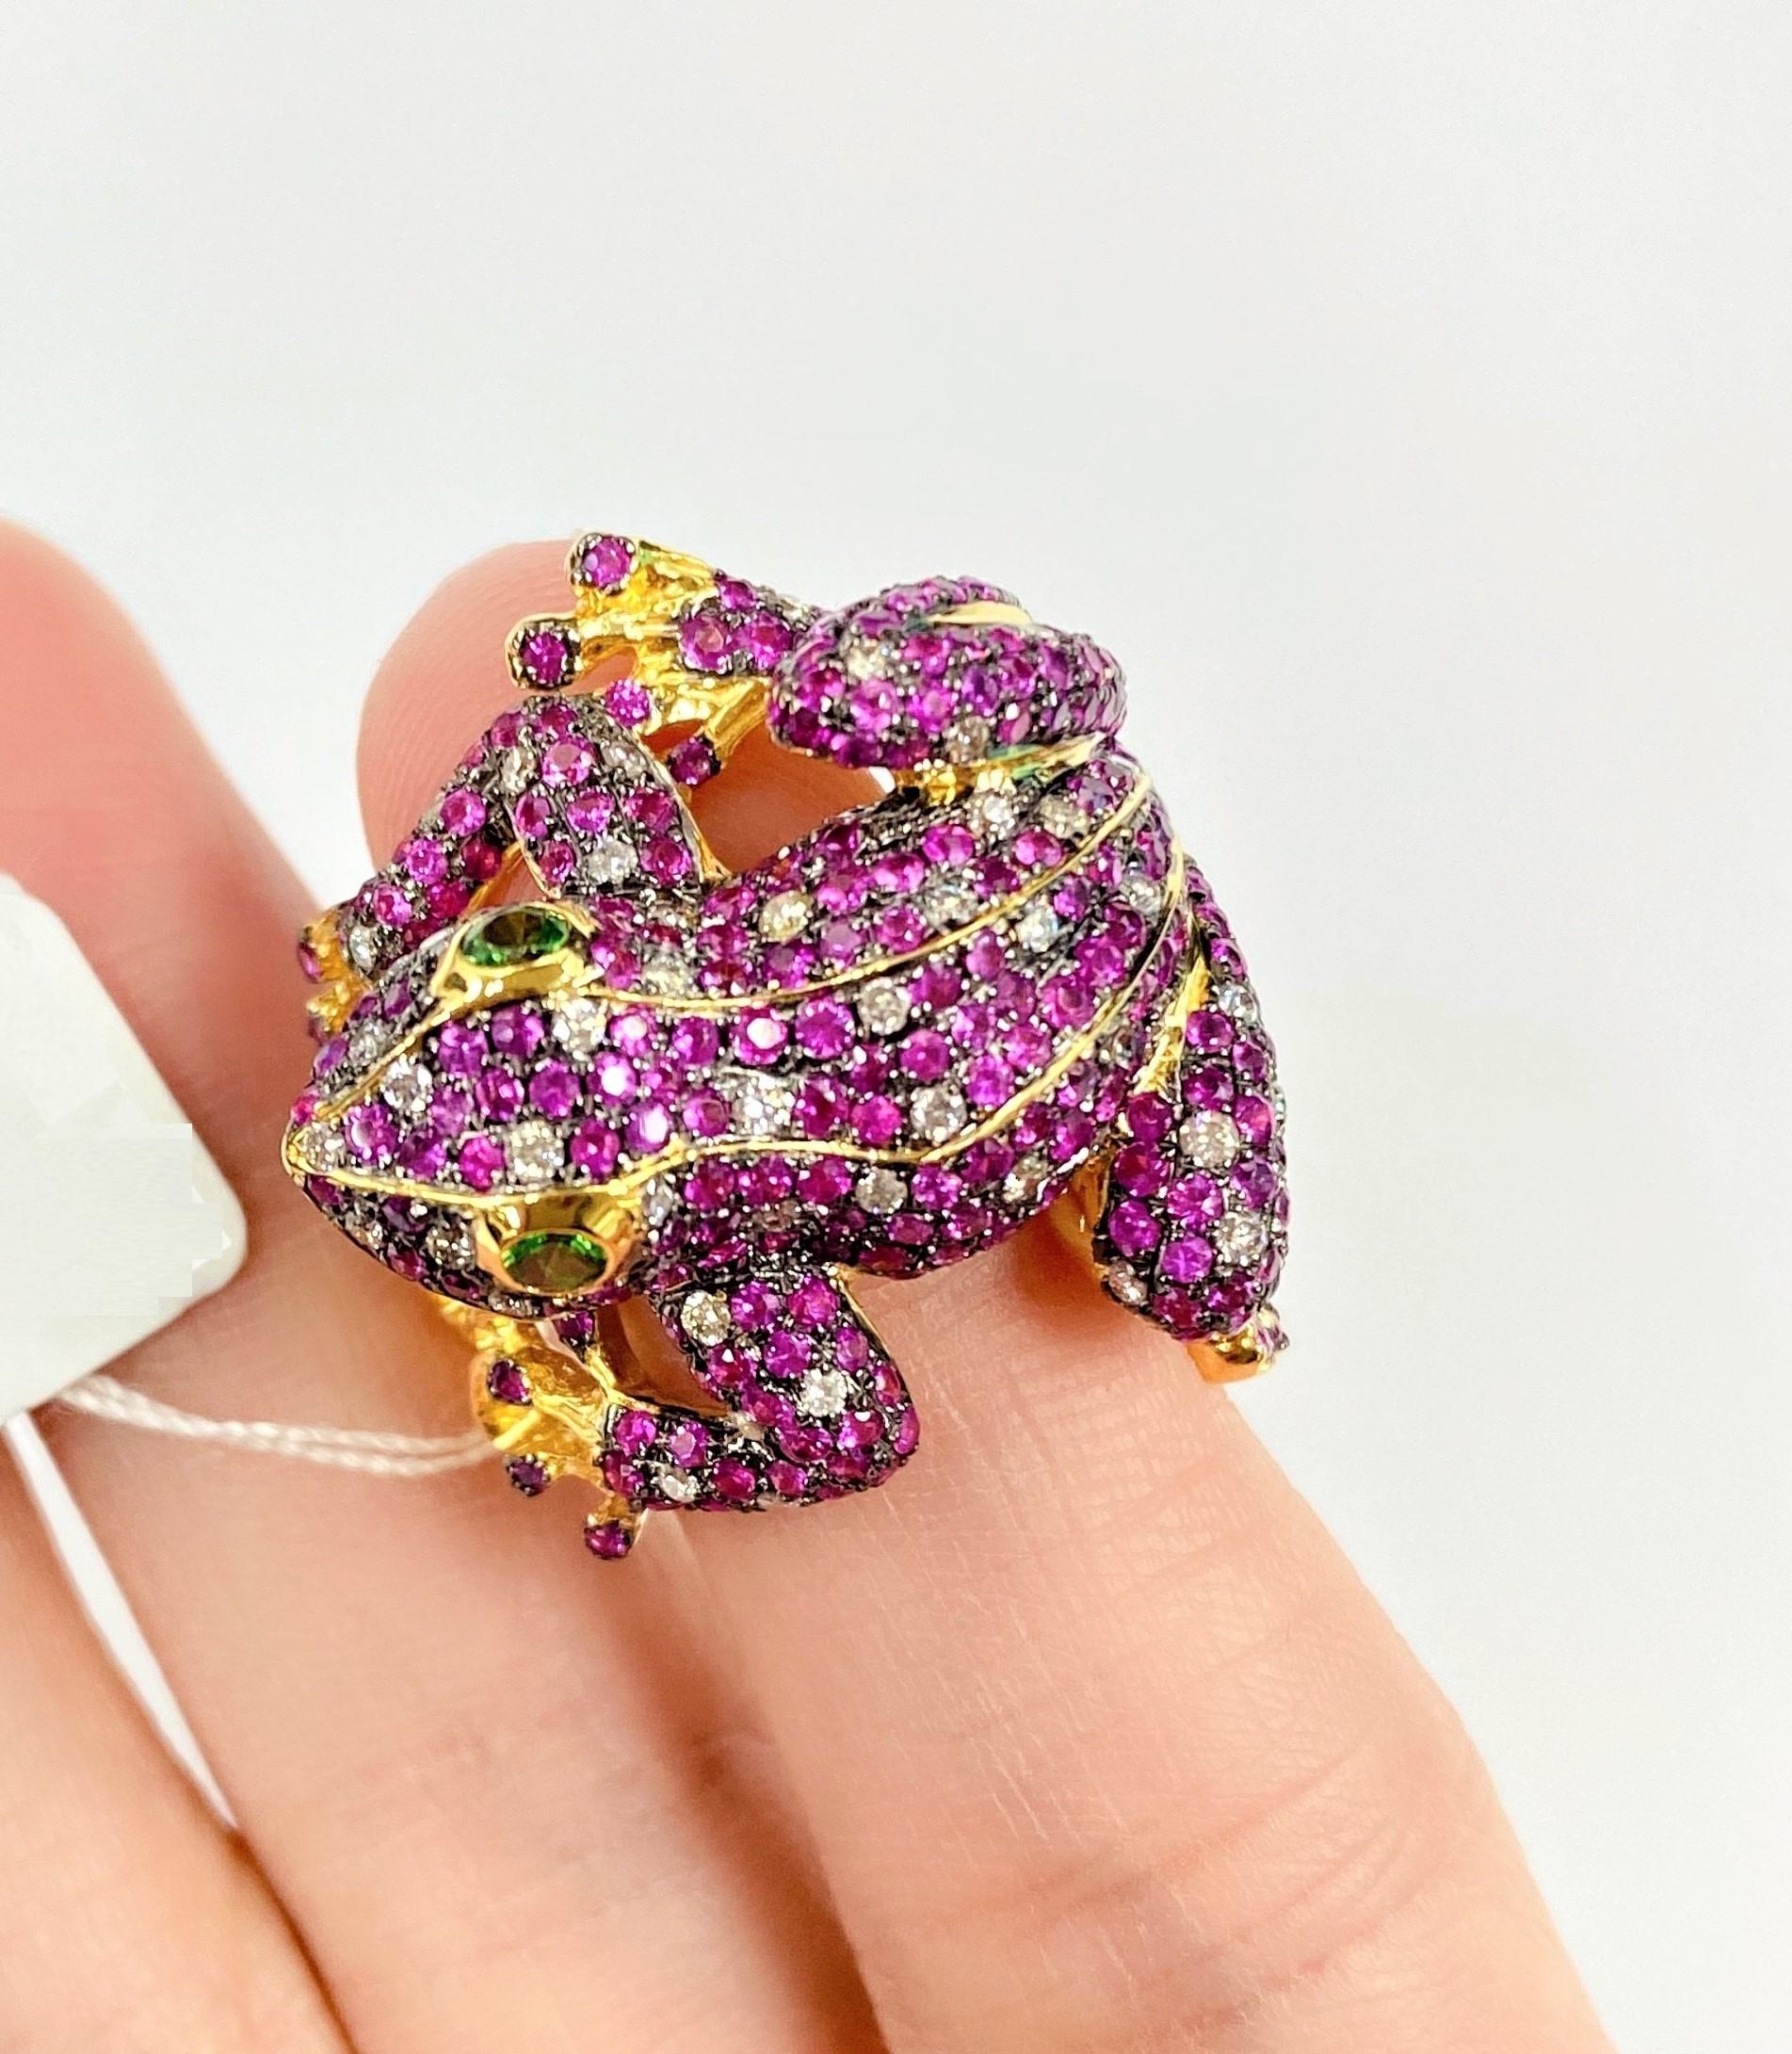 The Following Items we are offering is An Outstanding 18 Karat Gold Red Sapphire, Tsavorite, and Diamond Ring, consisting of an 18KT Golden Jeweled frog pave set with numerous round single cut, Red Sapphires, Diamonds and two round mixed cut